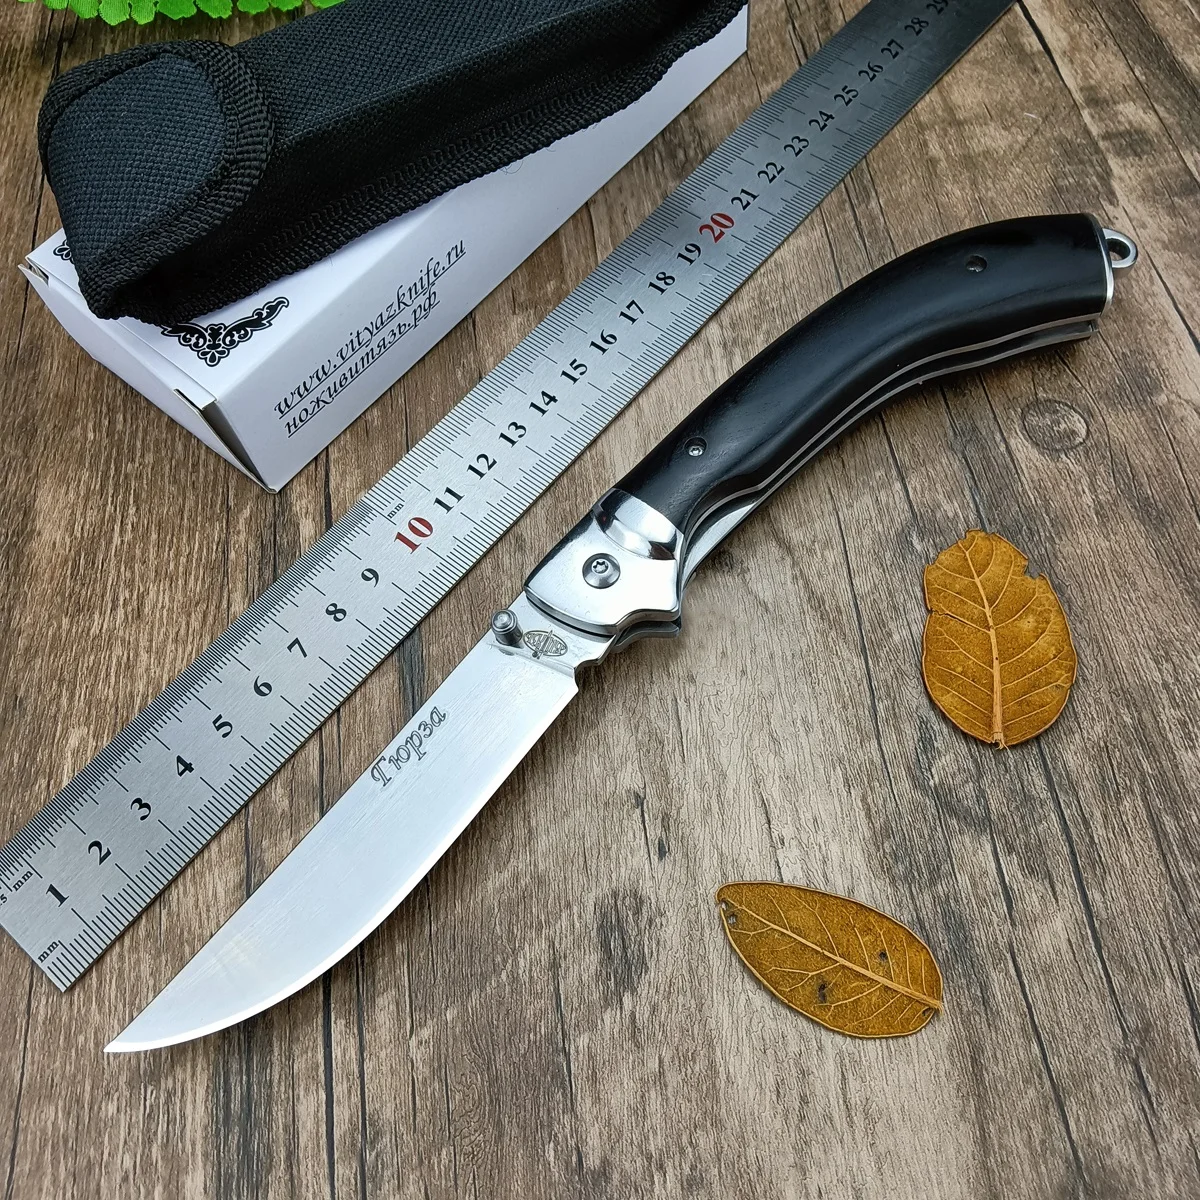 

Russia Stainless Steel Blade Folding Knife Chicken Wing Wooden Handle Outdoor Hunting Fishing Self Defense Multi-tool Jackknife